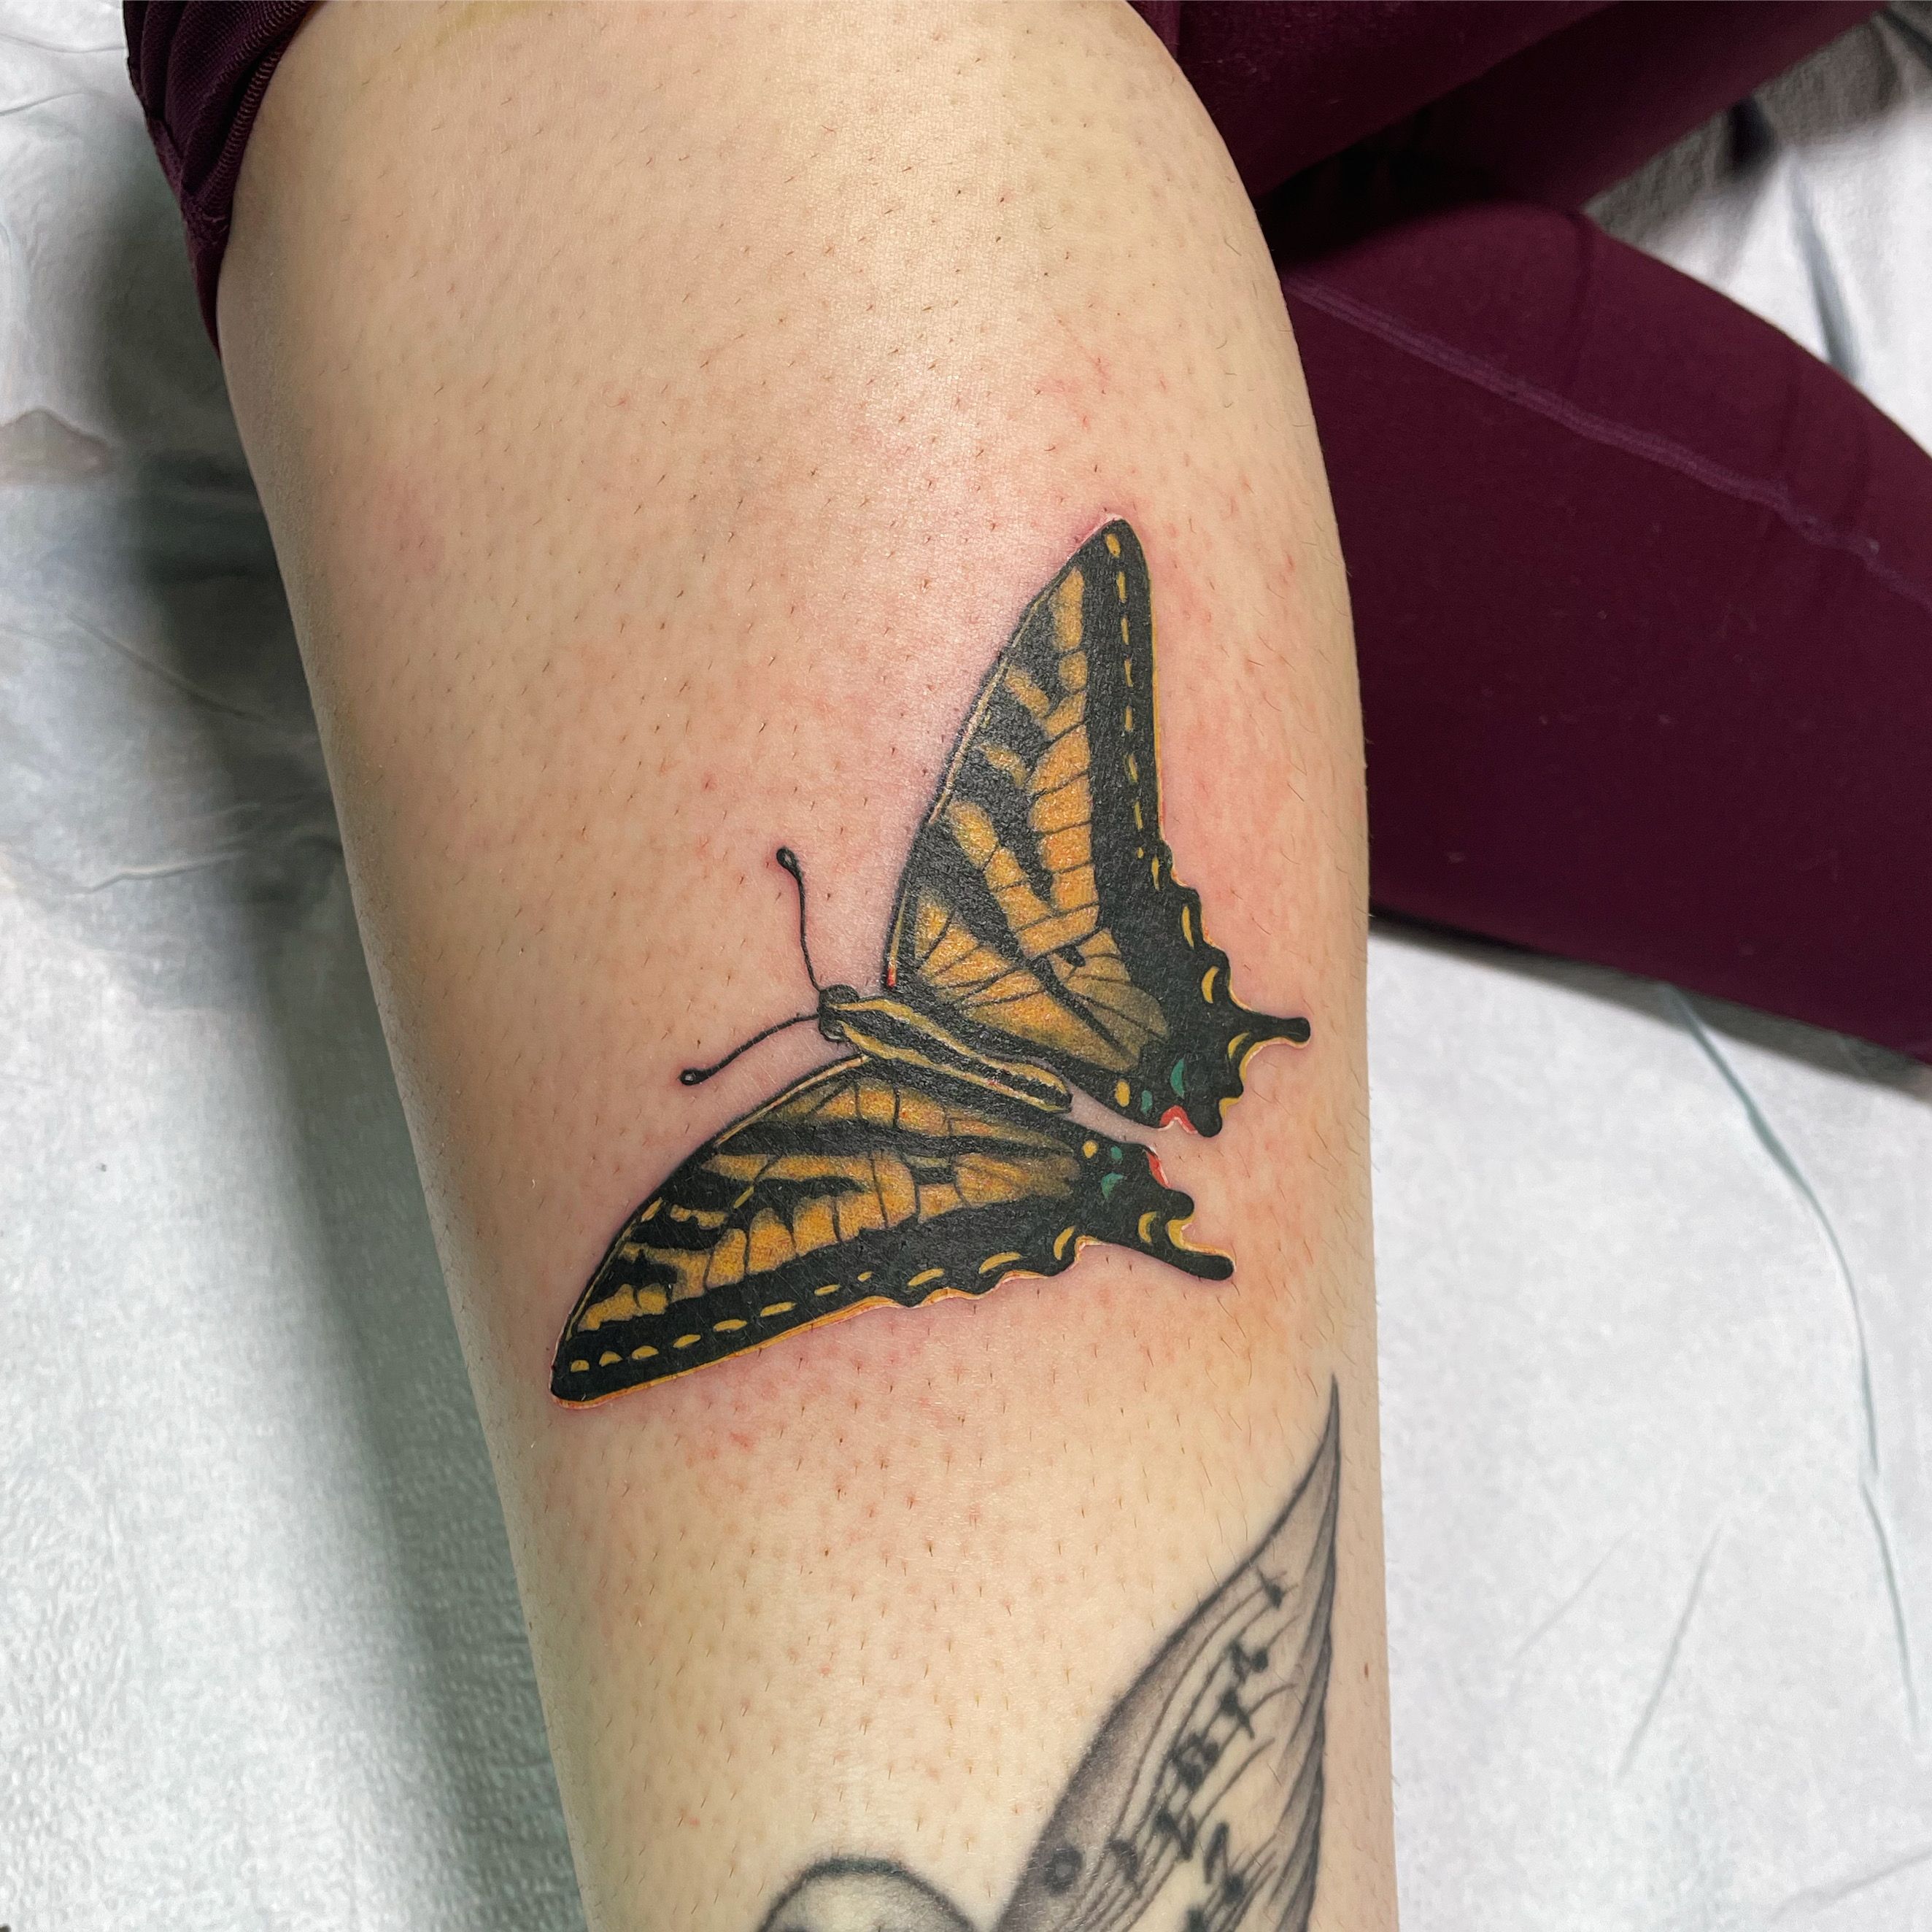 Details more than 72 swallowtail butterfly tattoo best  thtantai2